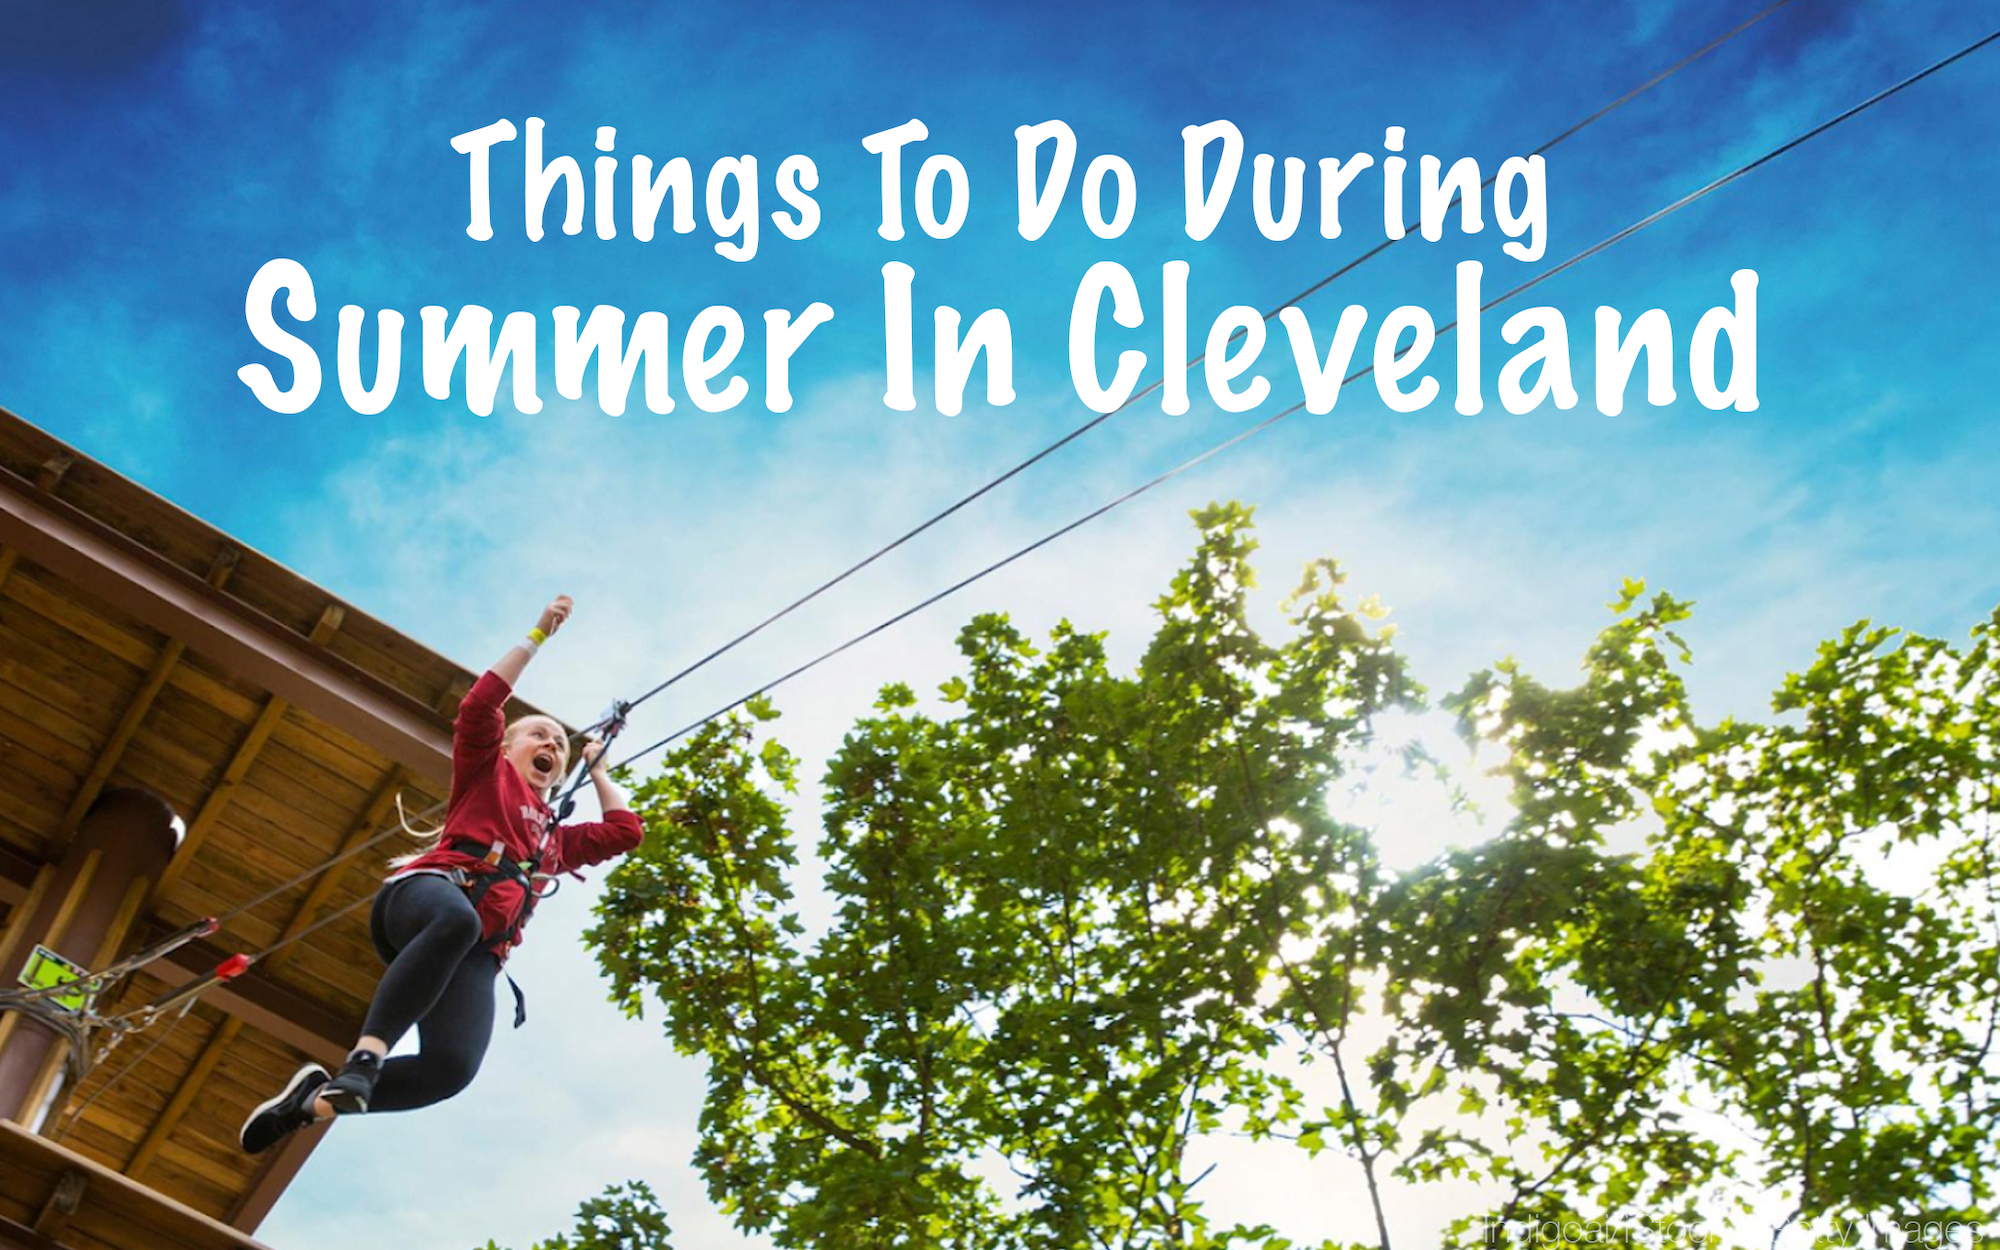 26 Places For Summertime Fun In Cleveland